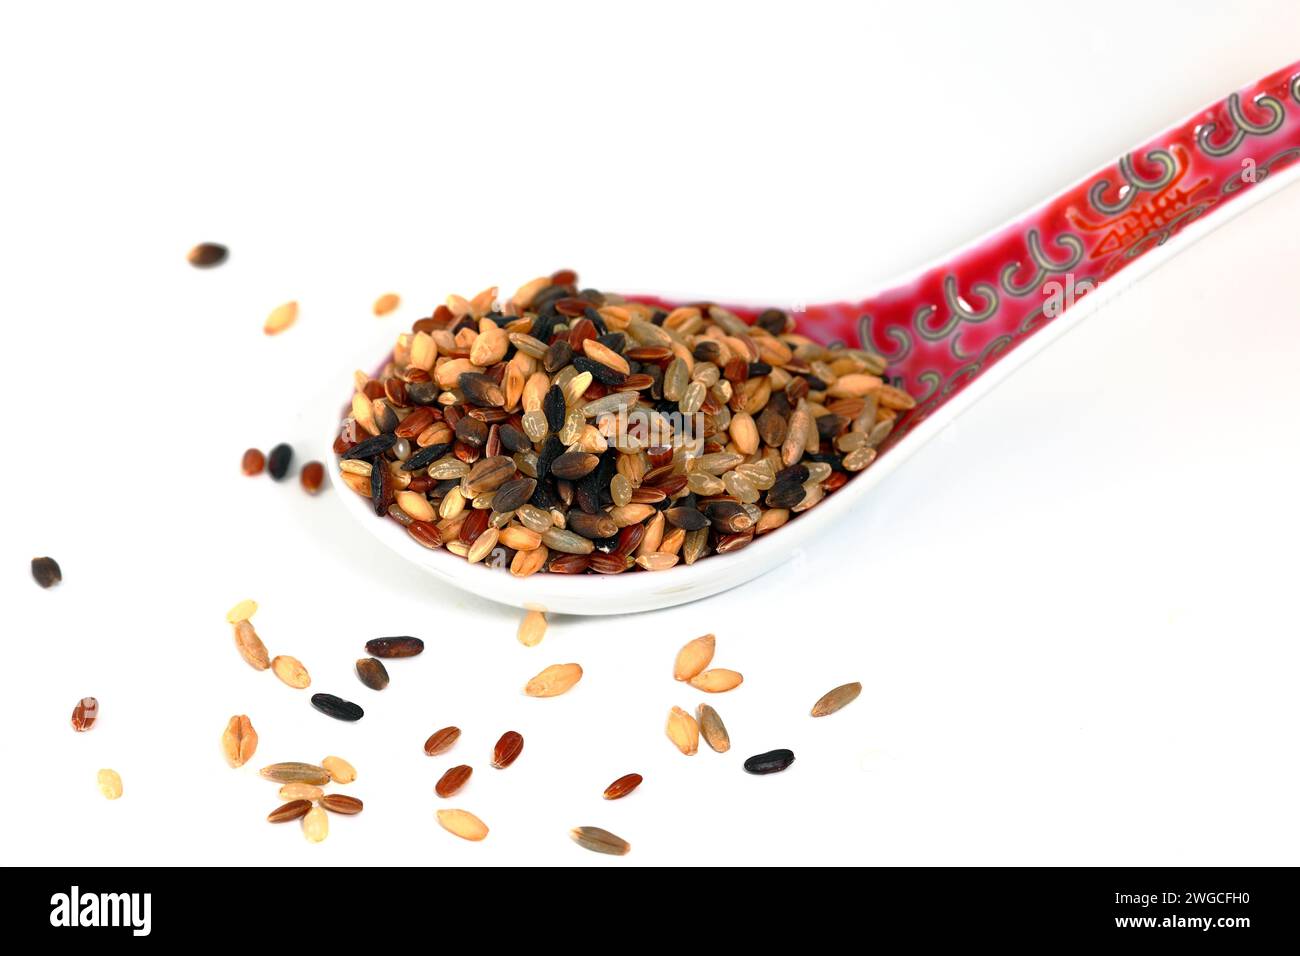 A soup spoon of 6 grain rice red rice,榖米 black rice, purple barley, hulless barley, rye beries, red rice, brown rice isolated on a white background. Stock Photo